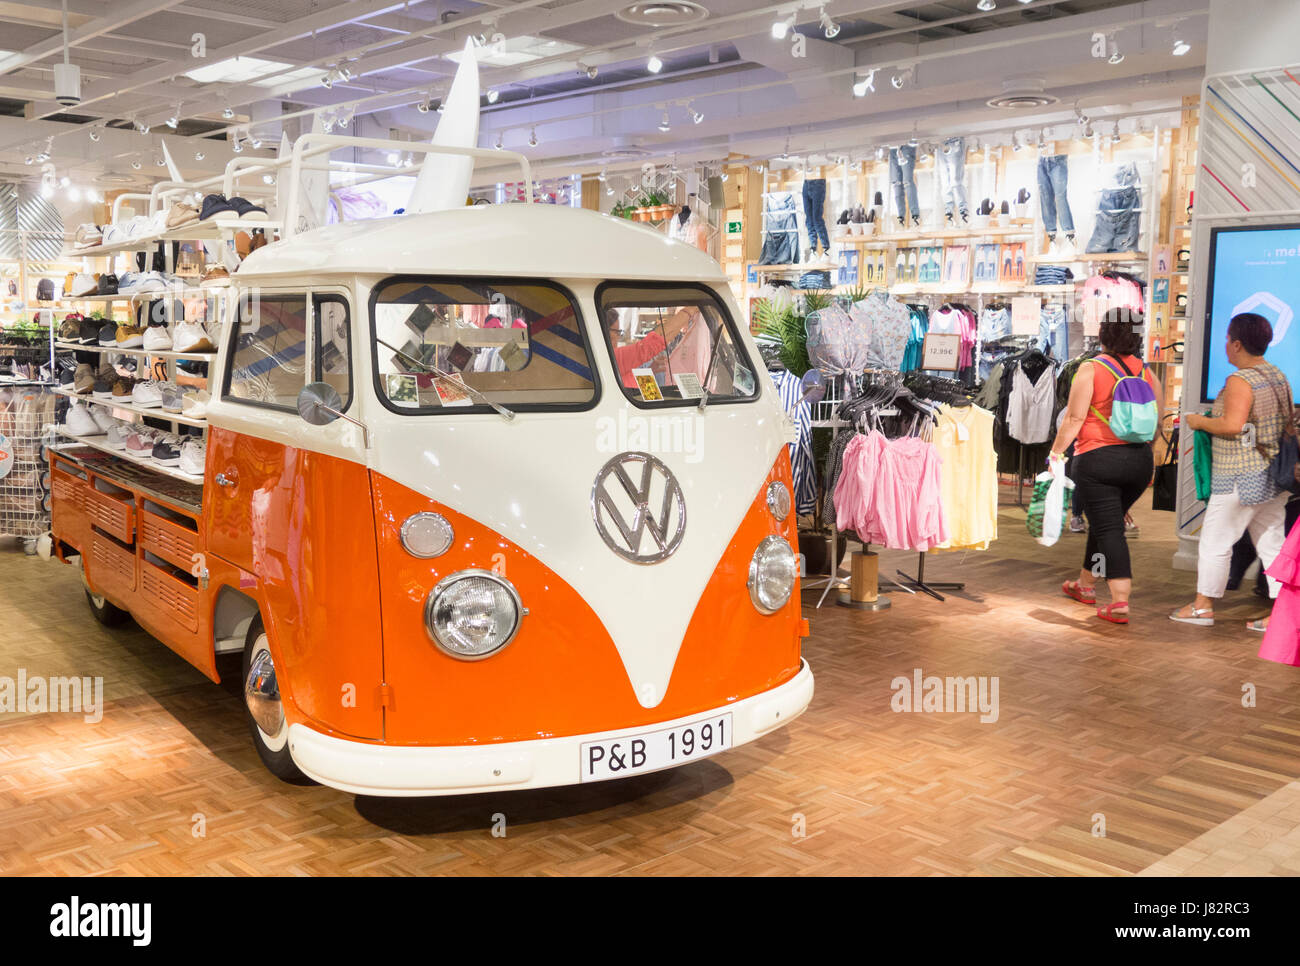 Pull & Bear clothing store in Spain with split screen VW used to display  footwear Stock Photo - Alamy